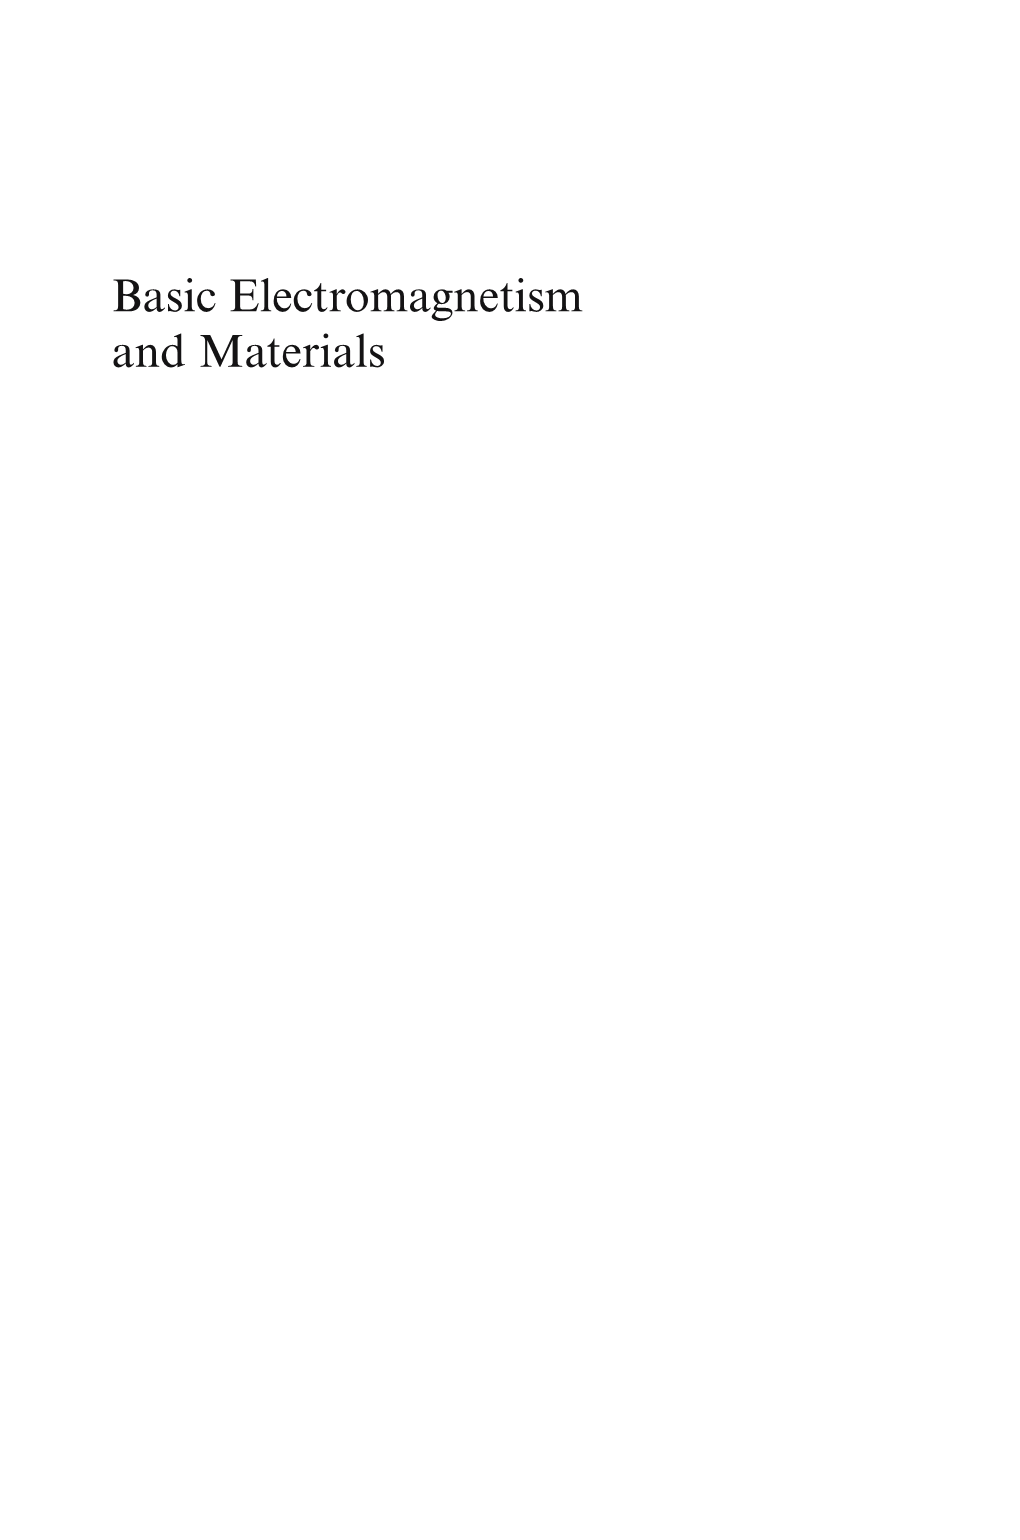 Basic Electromagnetism and Materials Basic Electromagnetism and Materials